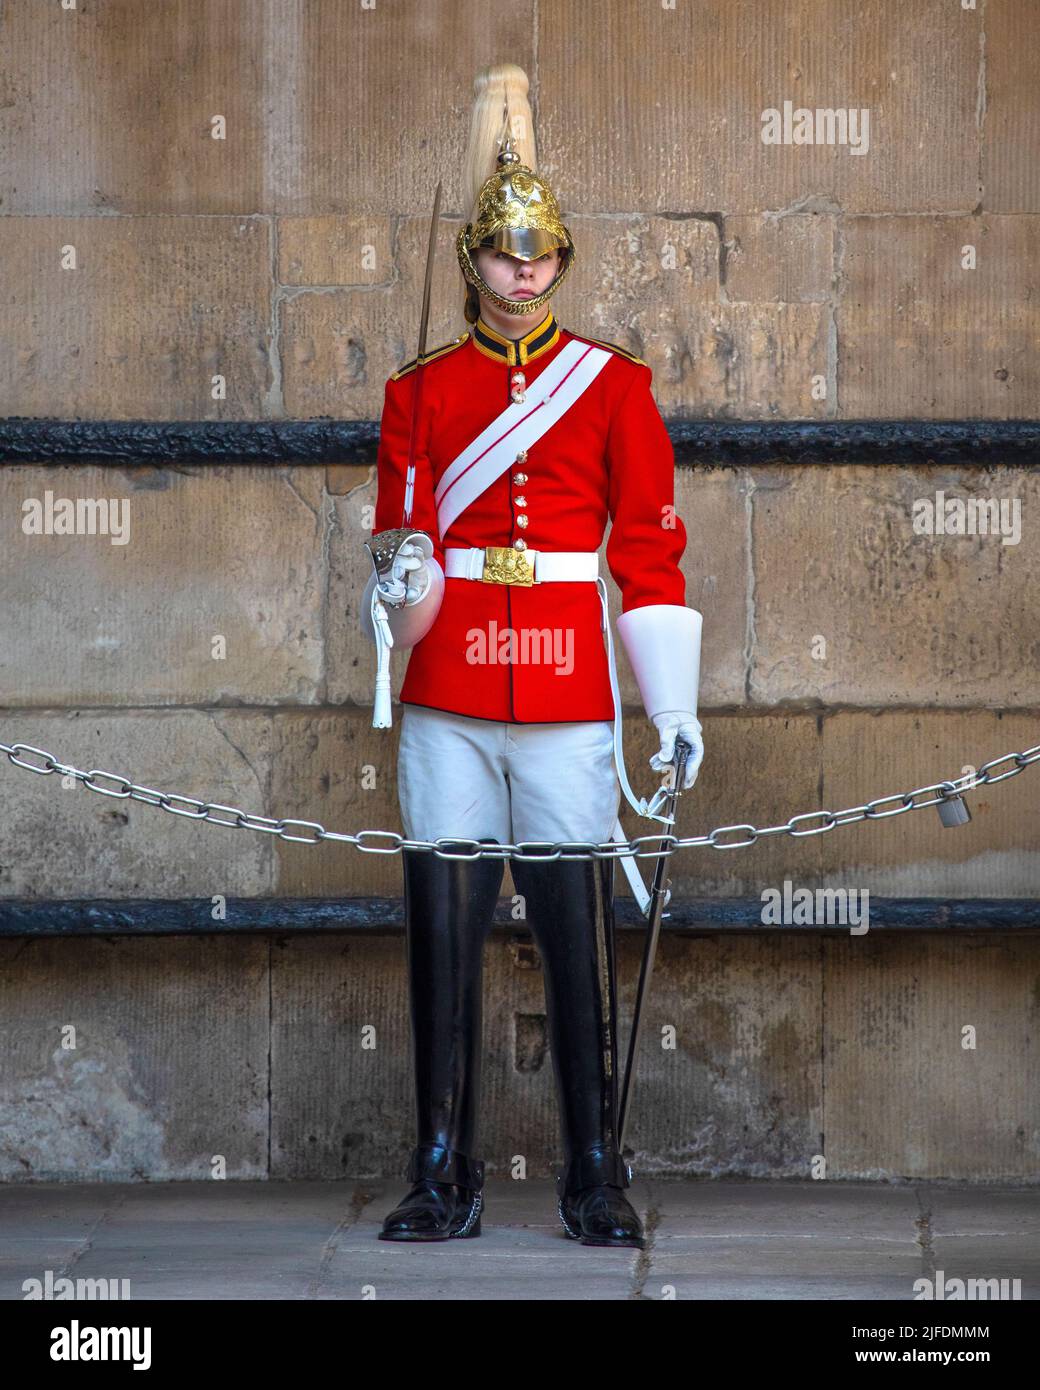 London, UK - April 20th 2022: A Queen’s Life Guard, pictured at Horse Guards Parade in Westminster, London, UK. Stock Photo